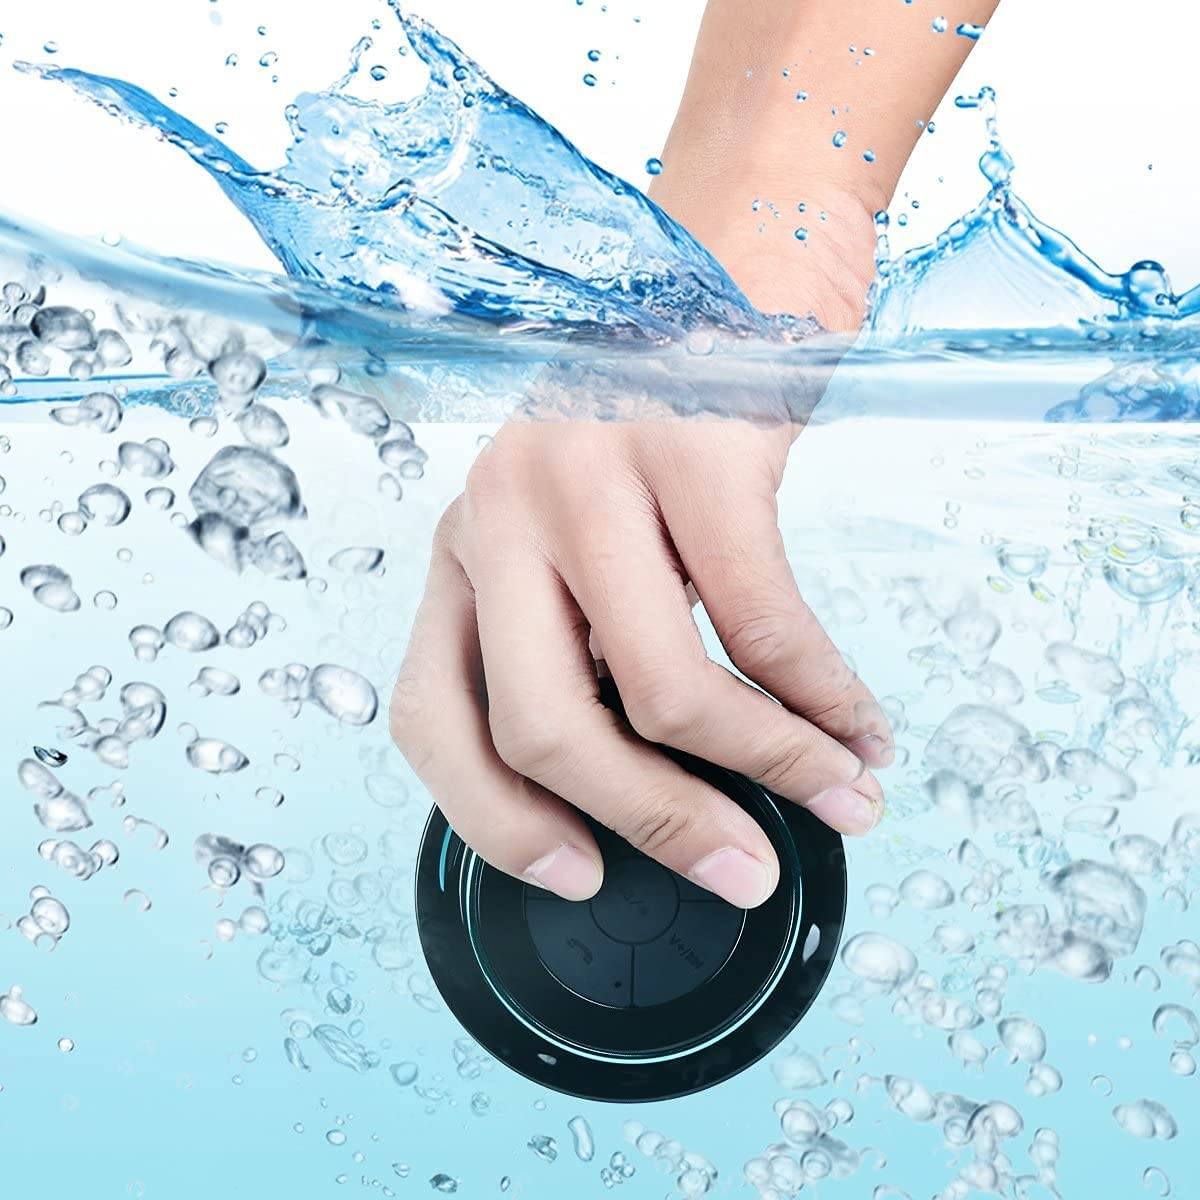 HAISSKY Portable Wireless Waterproof Speaker with FM Radio & Suction Cup